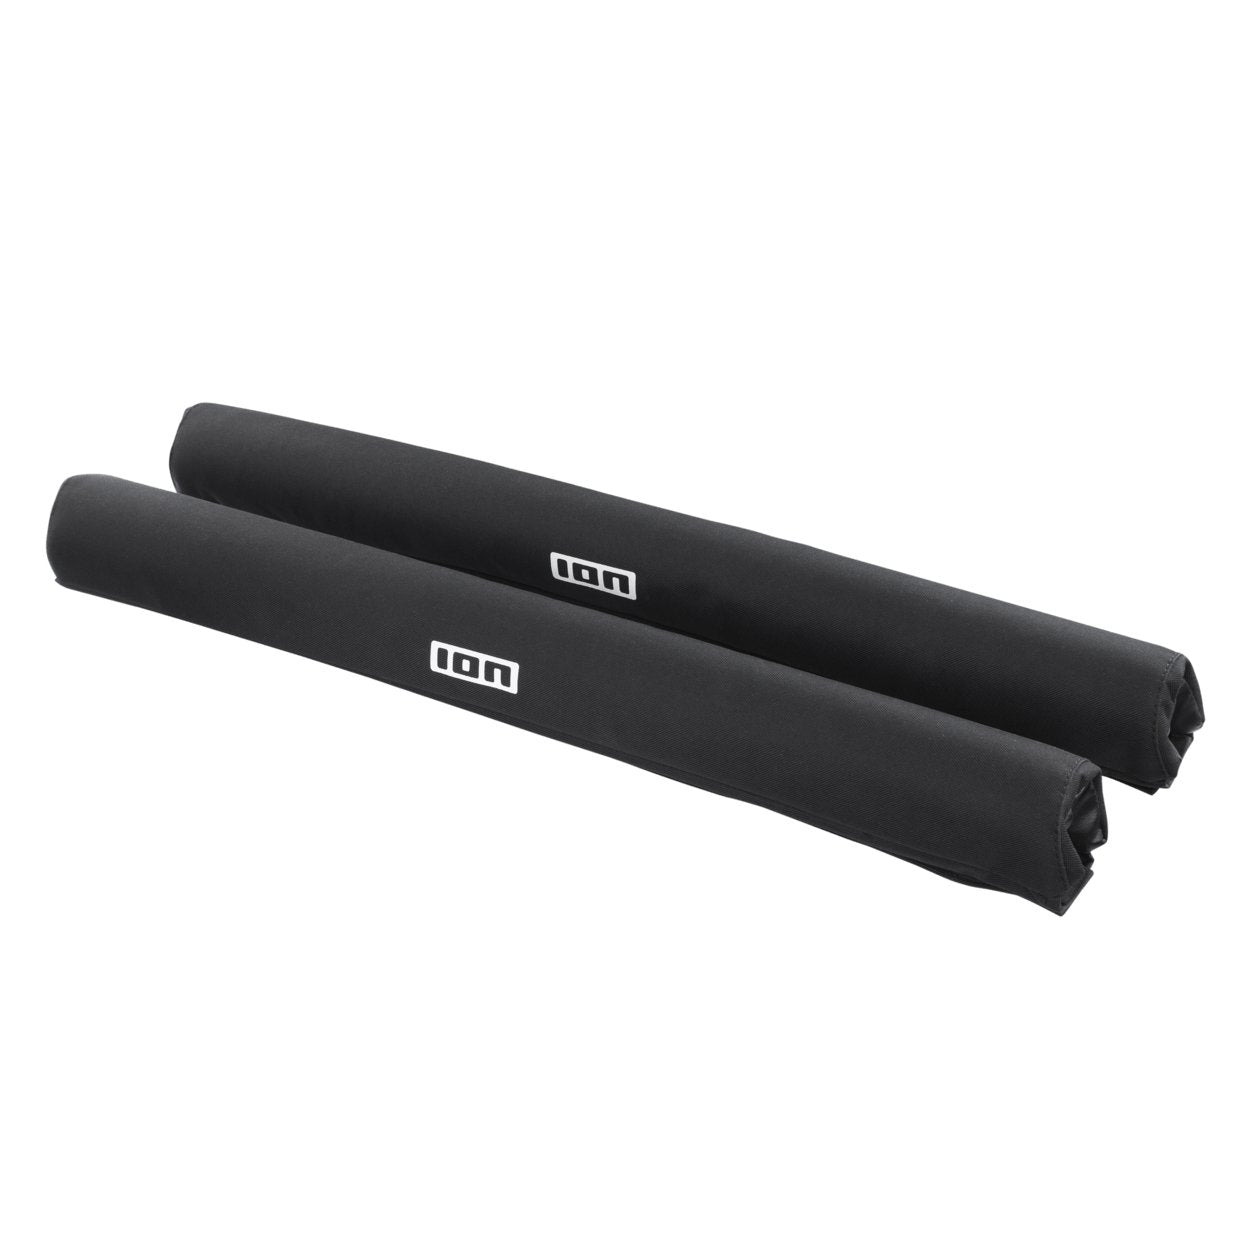 ION Roof Rack Pads 70 2022 - Worthing Watersports - 9008415558636 - Accessories - ION Water